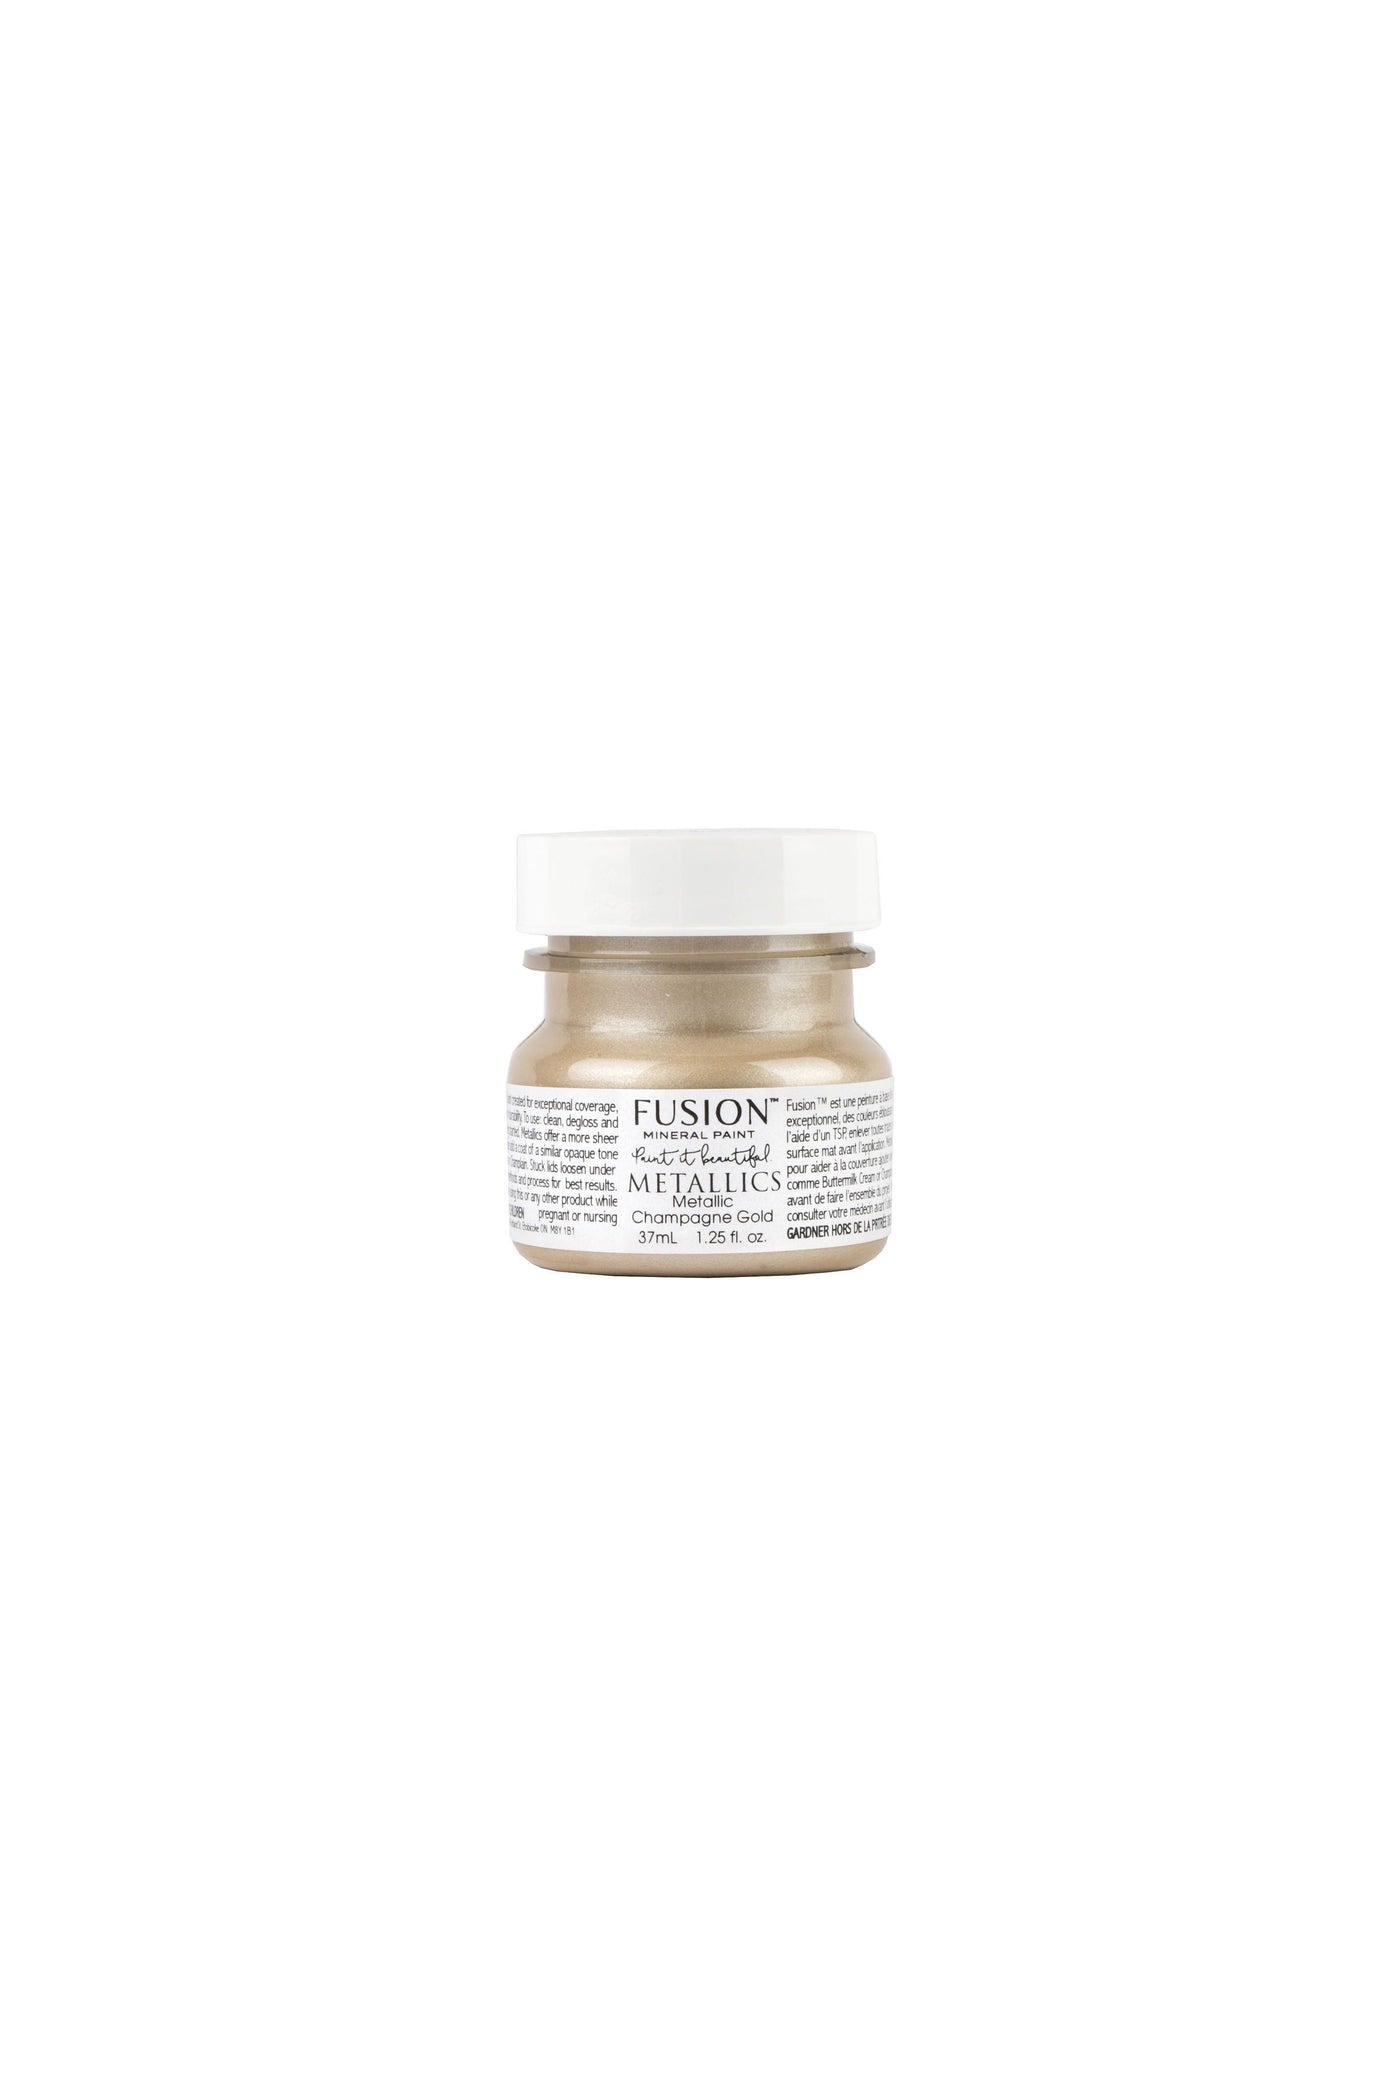 Fusion Mineral Paint Champagne Gold metallic soft gold 37ml For the Love Creations Australian stockist